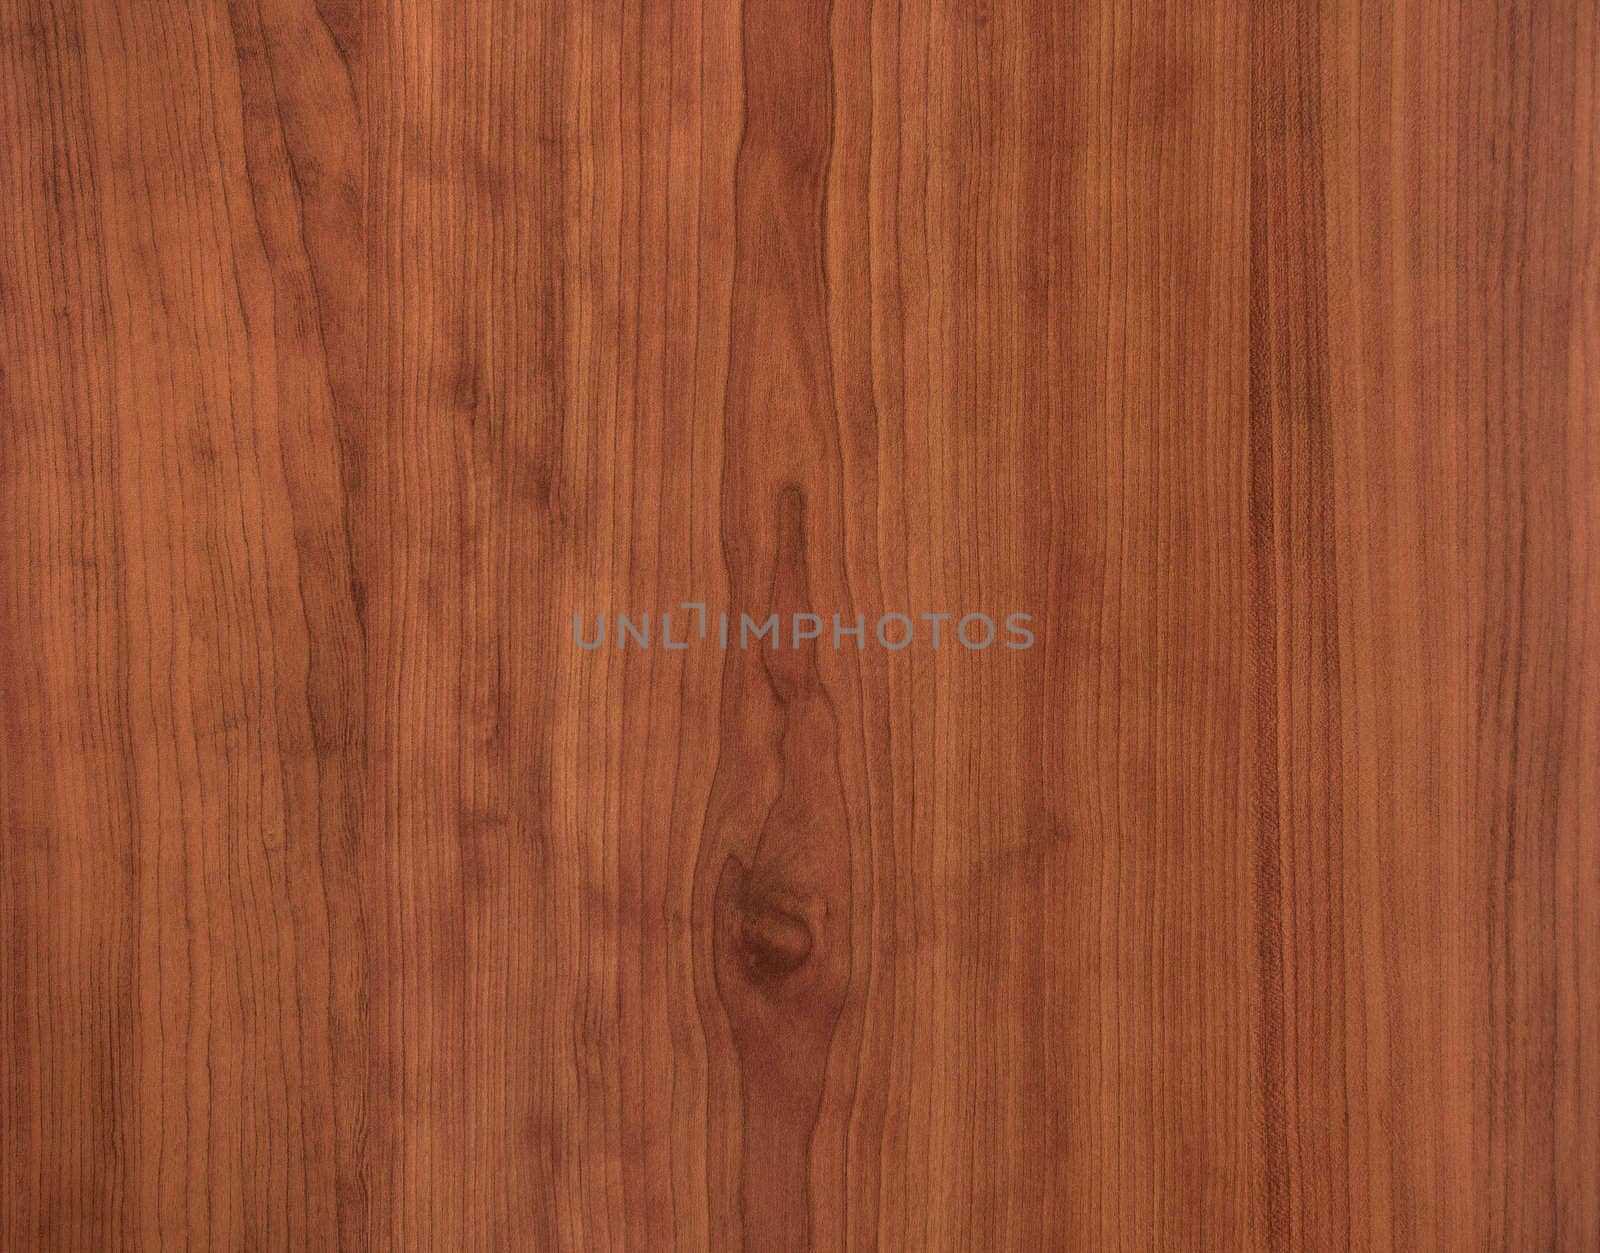 Brown wood grain table texture. Wooden background.